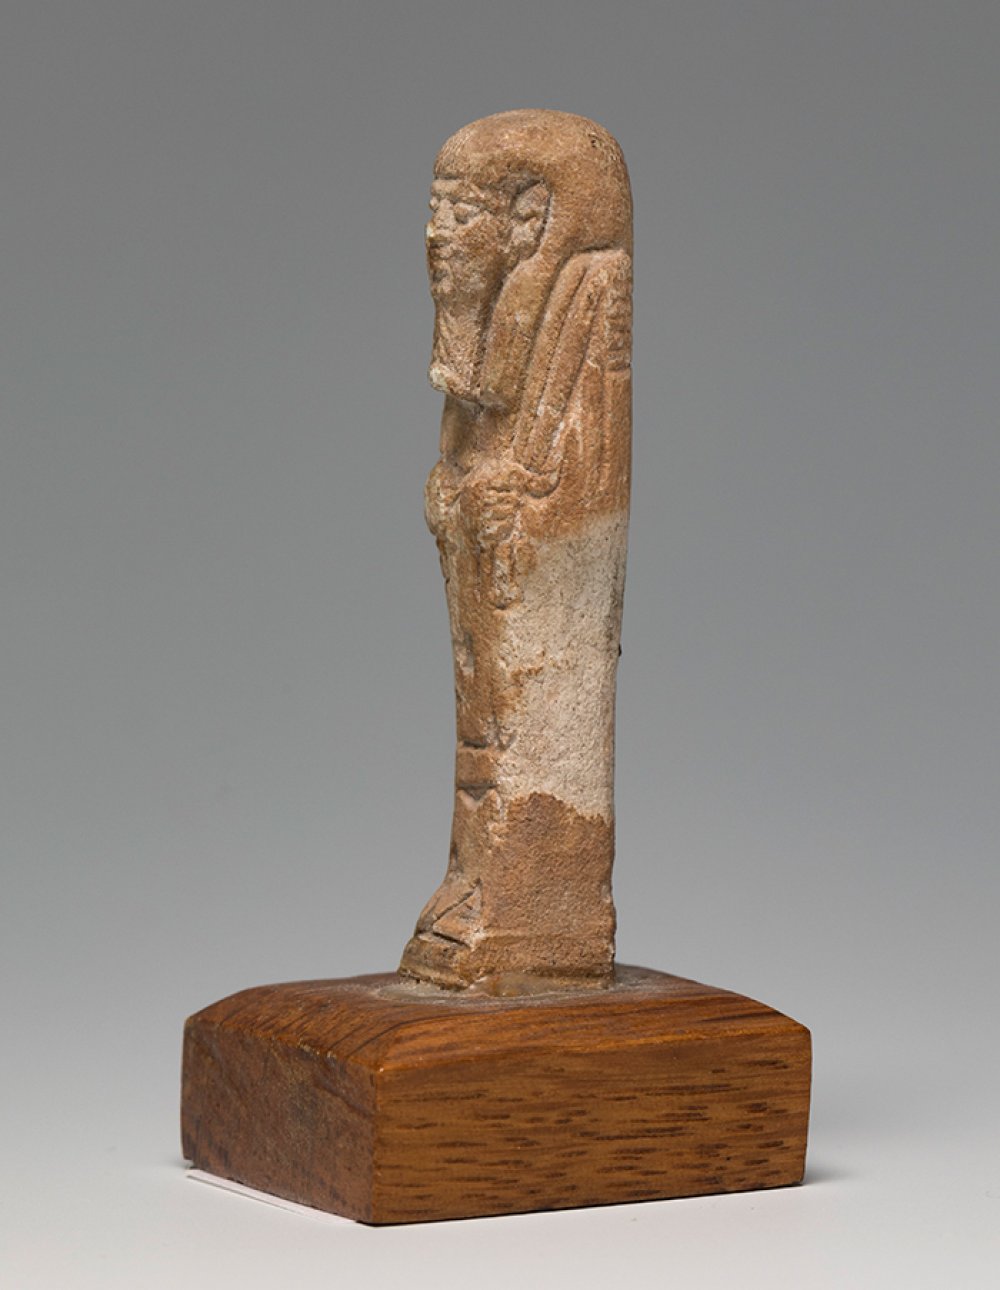 Ushebti; Egypt, Lower Egypt, Ptolemaic period, 2nd-1st century BC.Brown faience. Wooden base. - Image 2 of 4